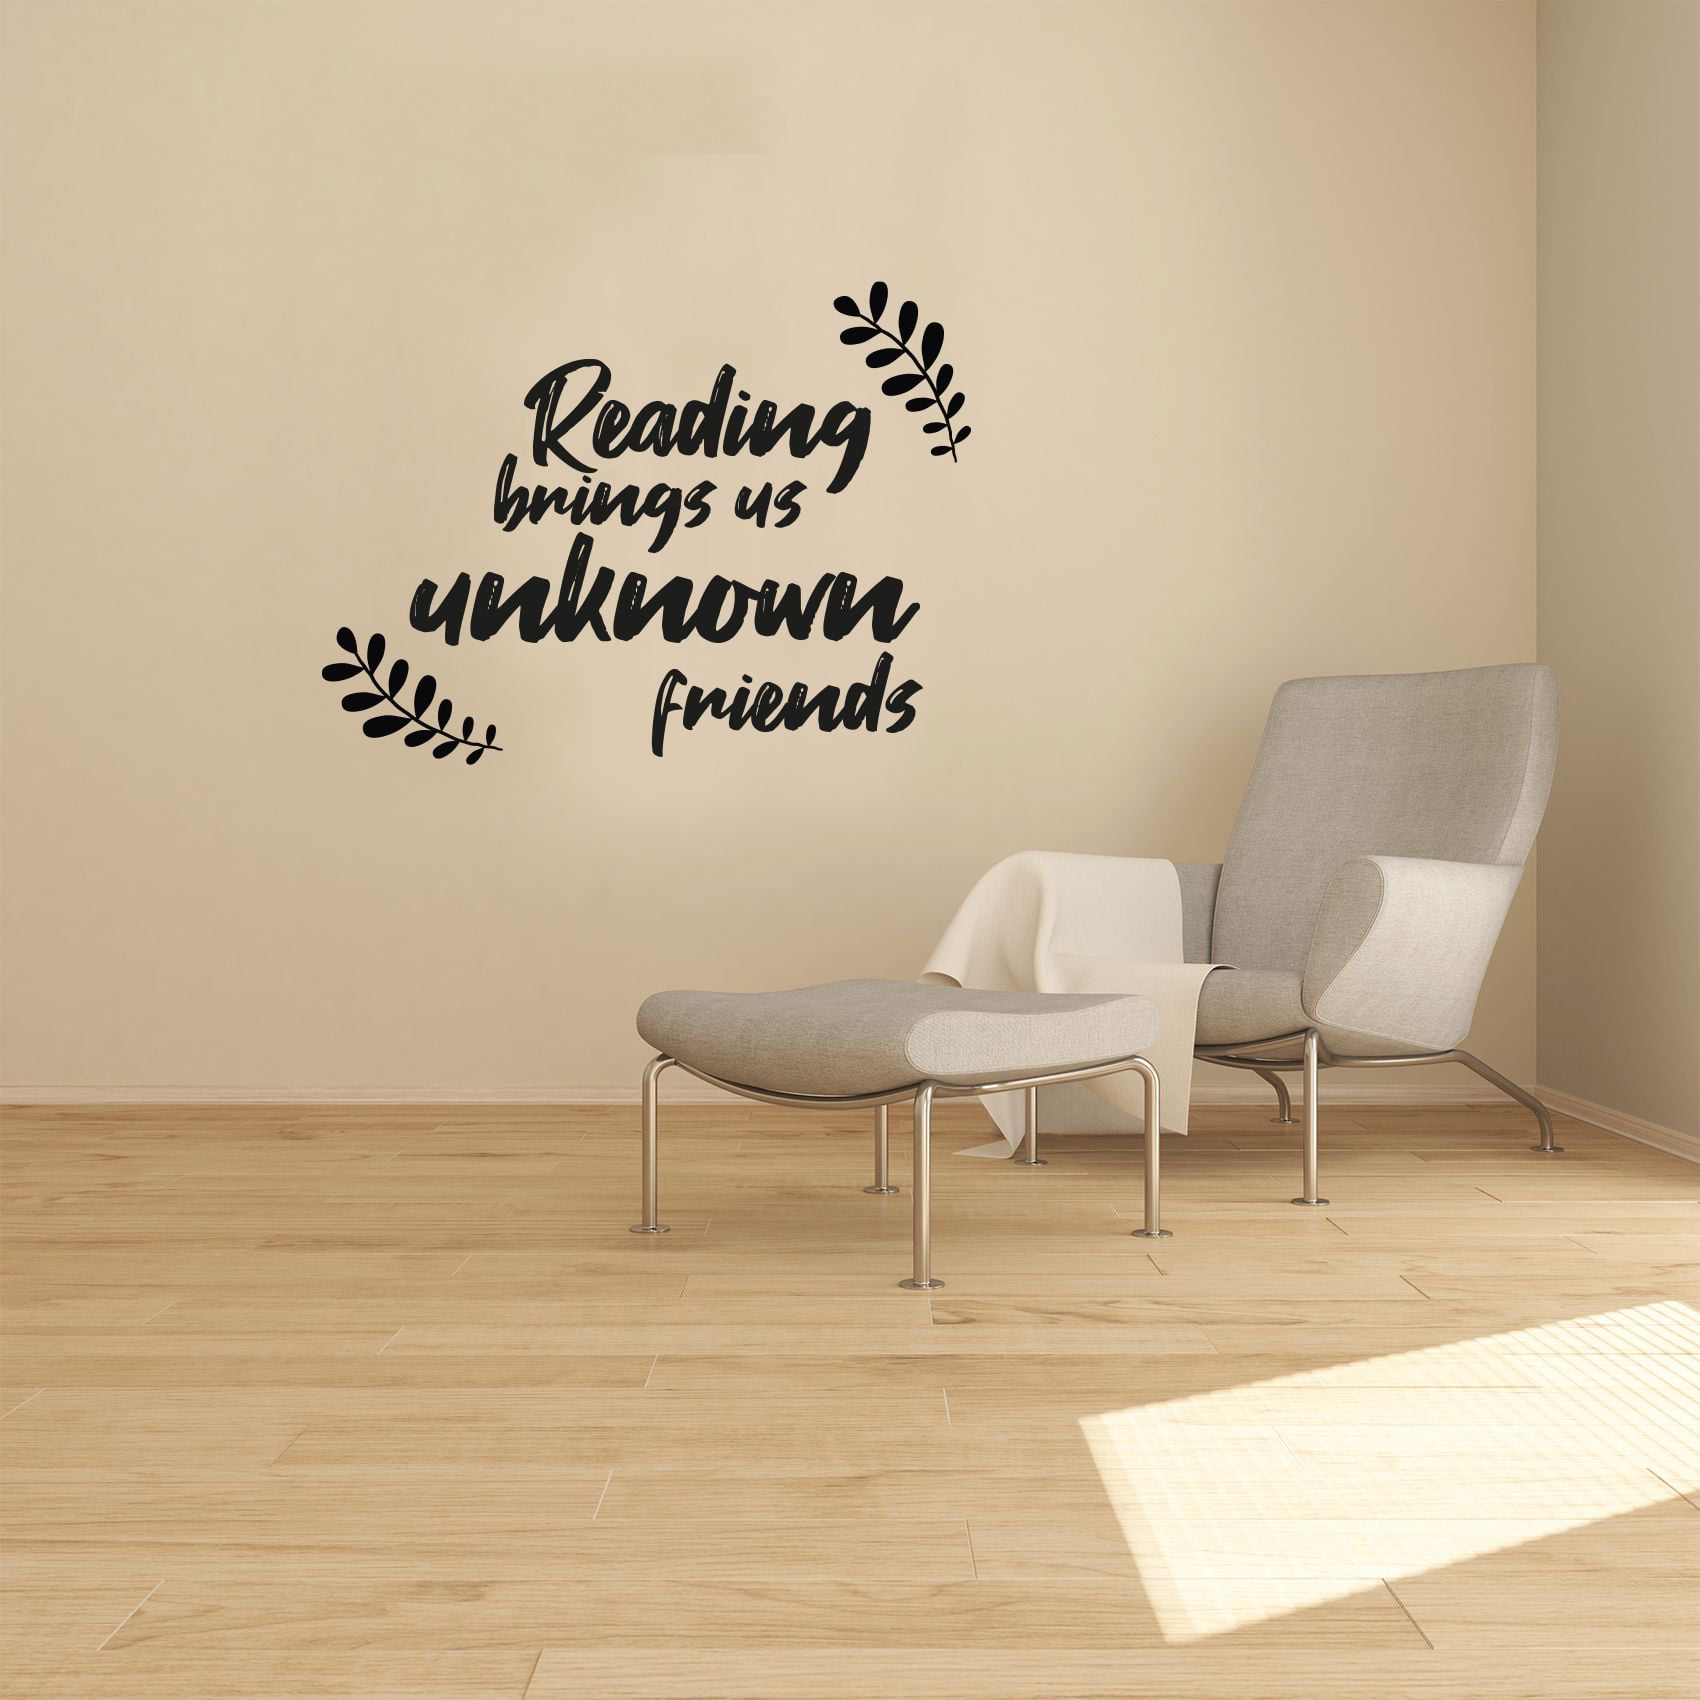 Reading Brings Us Unknown Friends - Reading Quotes Reading Hobby Vinyl Wall Art Sticker Wall Decal Home Library Area Reading Corner Boys Girls Kids Wall Décoration Design Décor Decal Size (24x40 inch) -